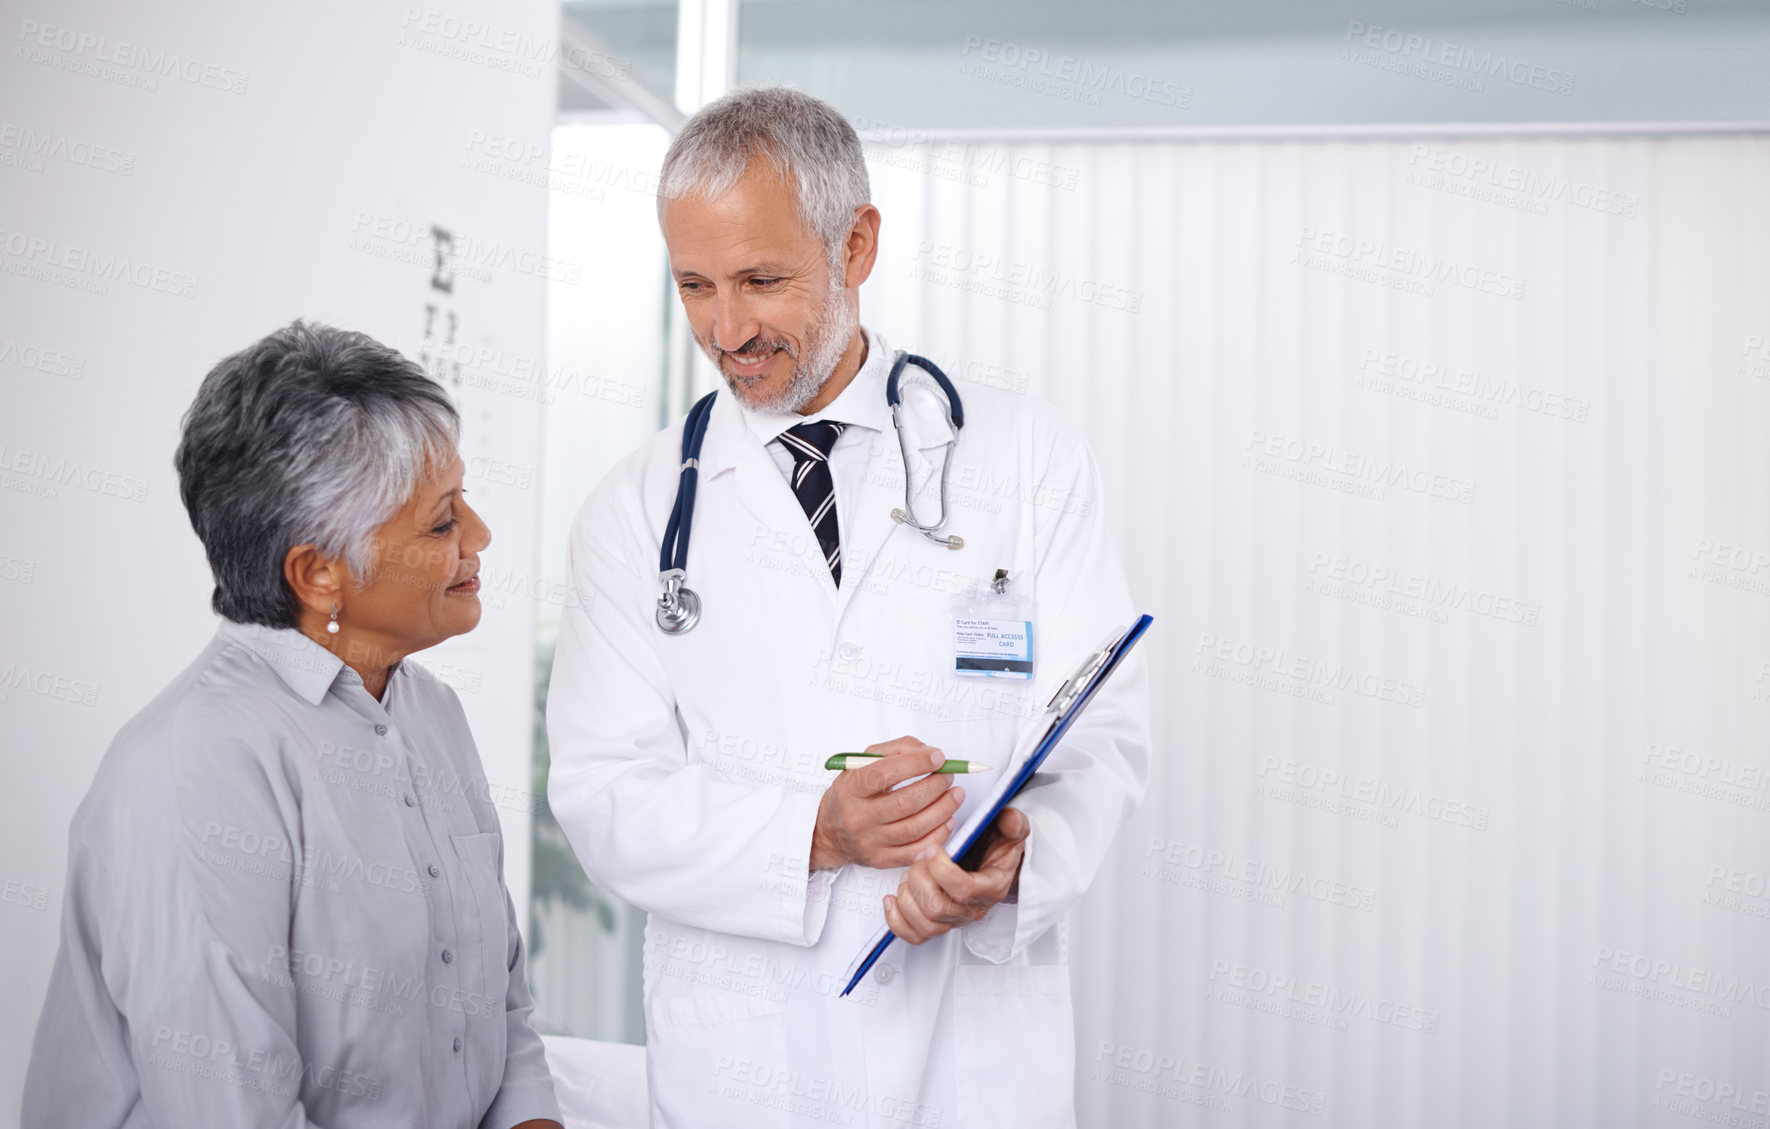 Buy stock photo A happy doctor seeing to one of his mature patients